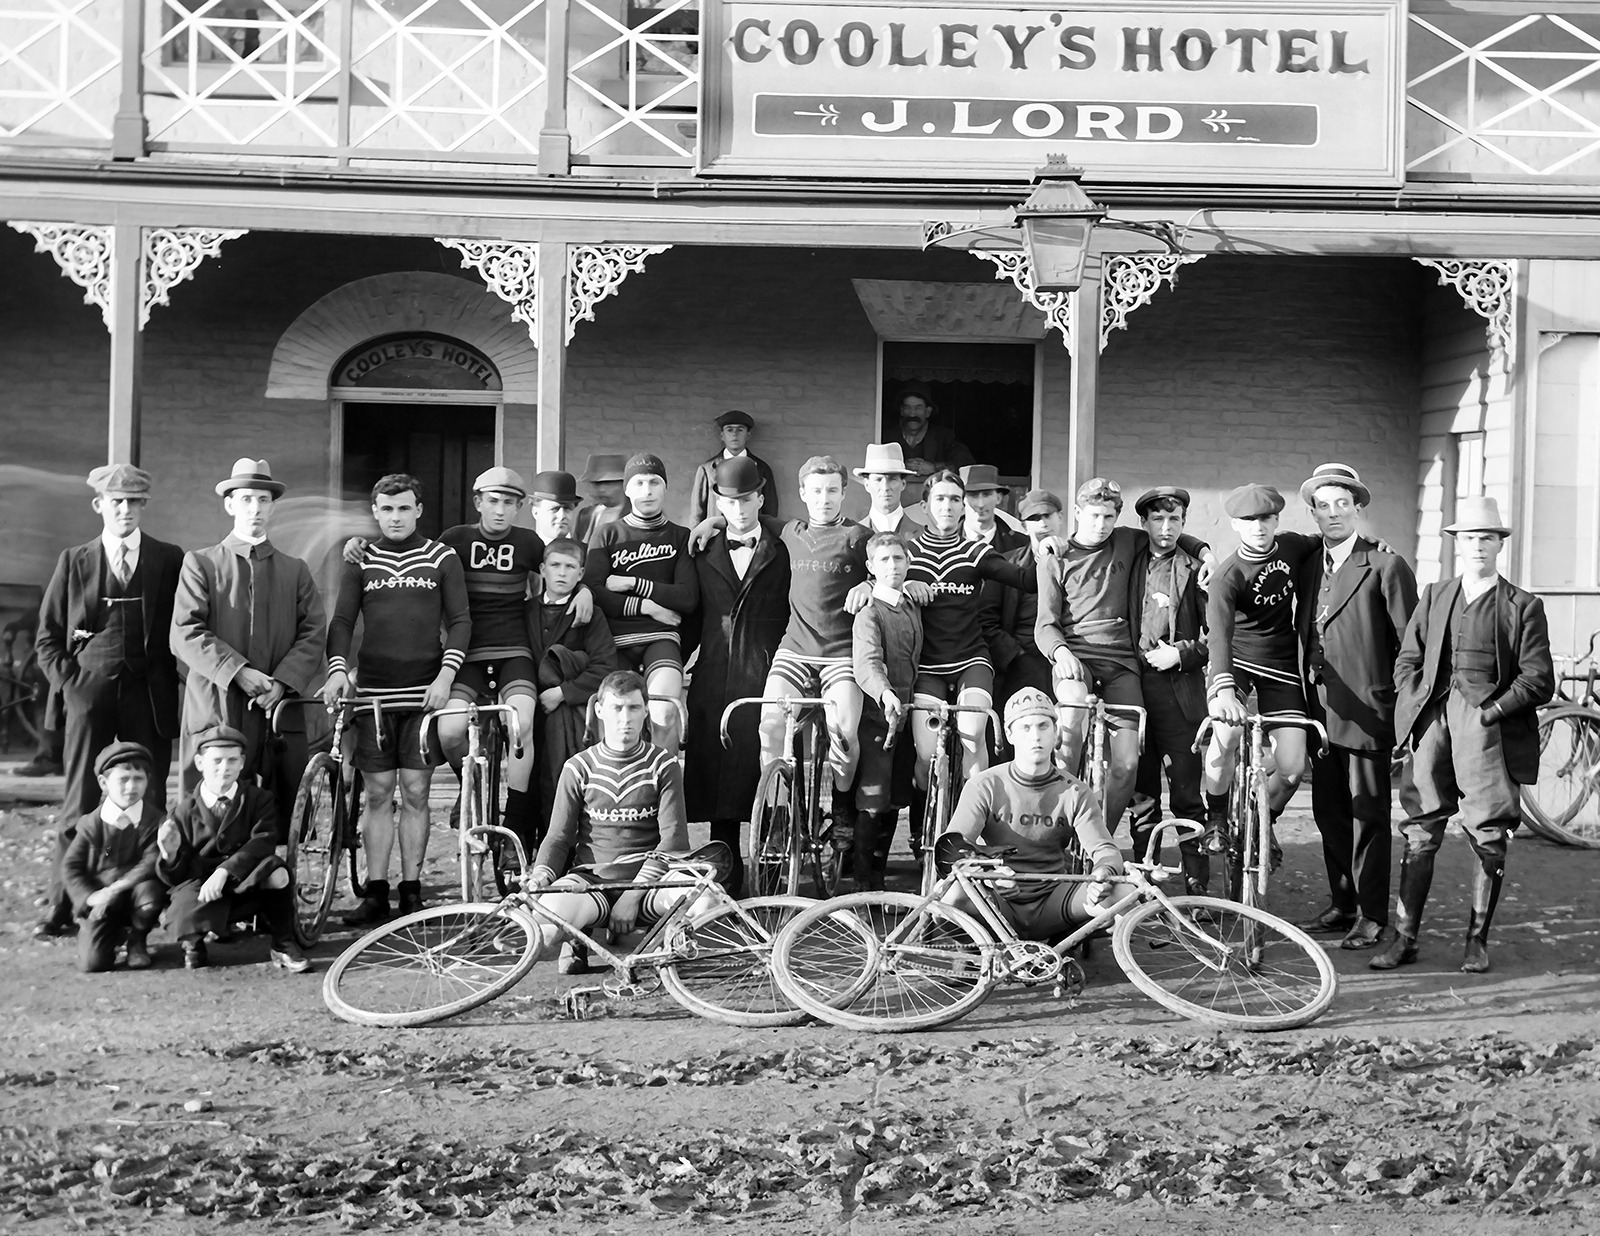 1910 Cyclists at Cooley's Hotel Vintage Old Bicycle Photo 8.5